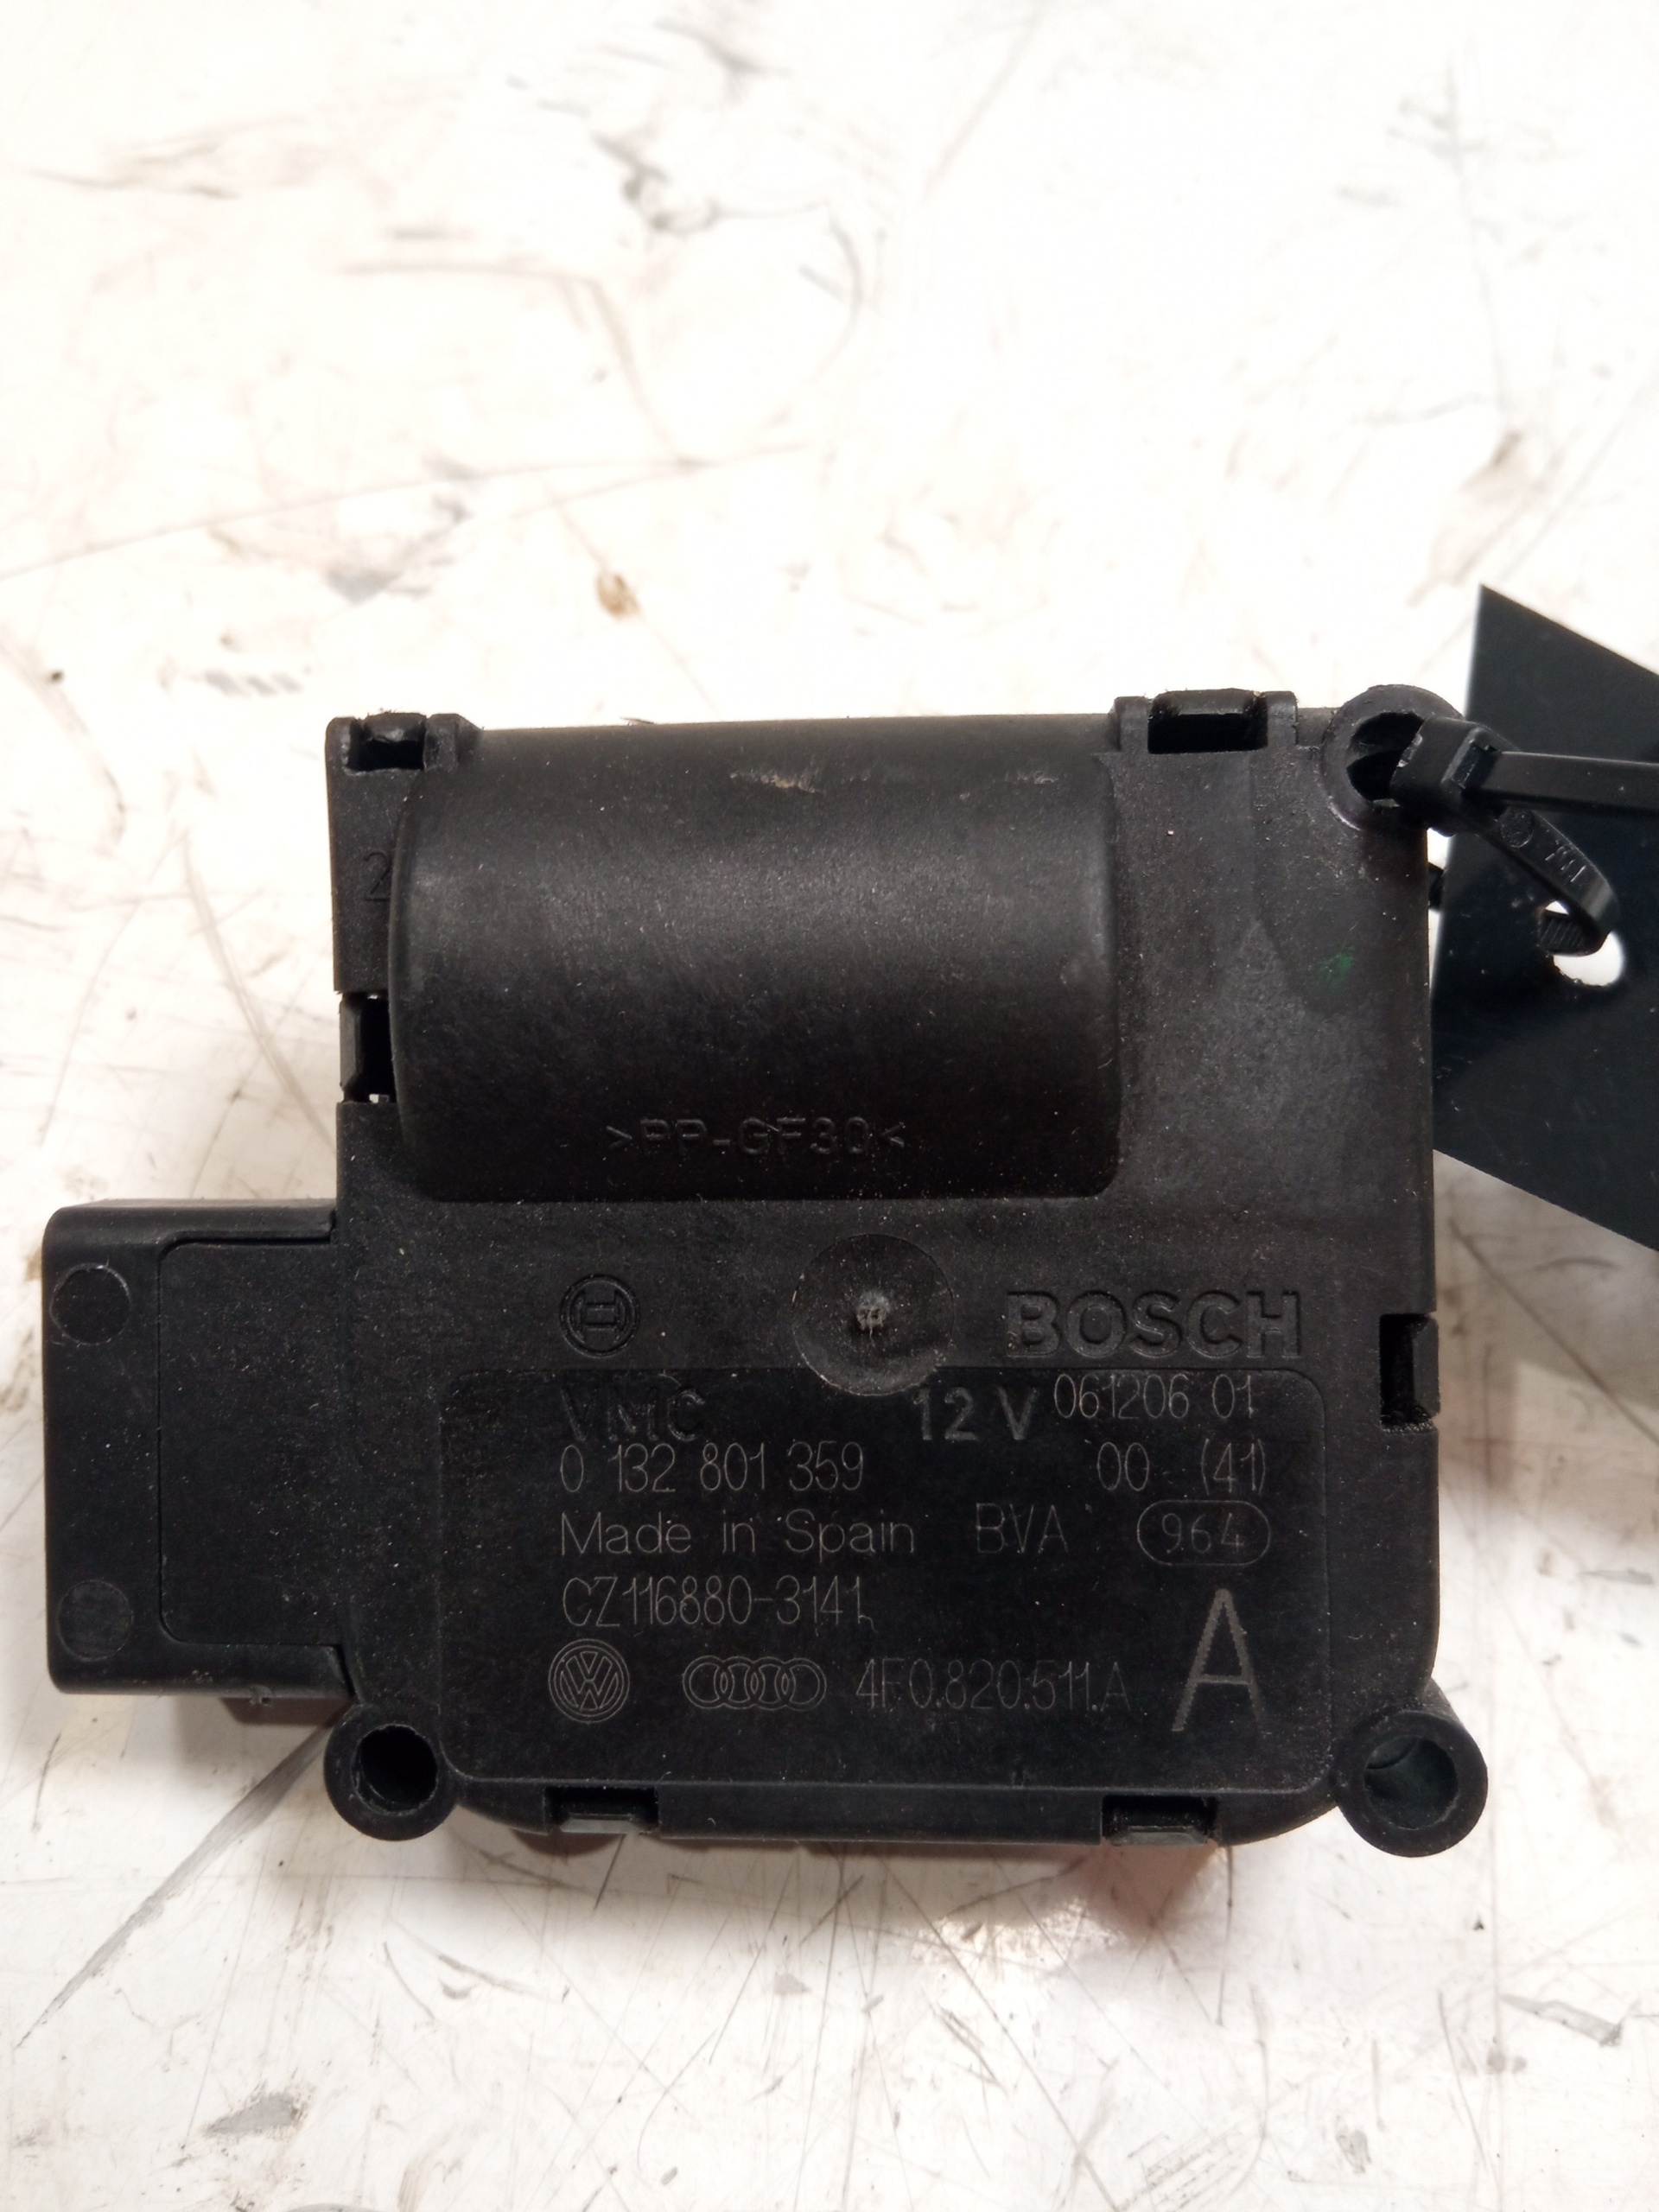 AUDI A6 C6/4F (2004-2011) Air Conditioner Air Flow Valve Motor 4F0820511A, 5PINES 24959039